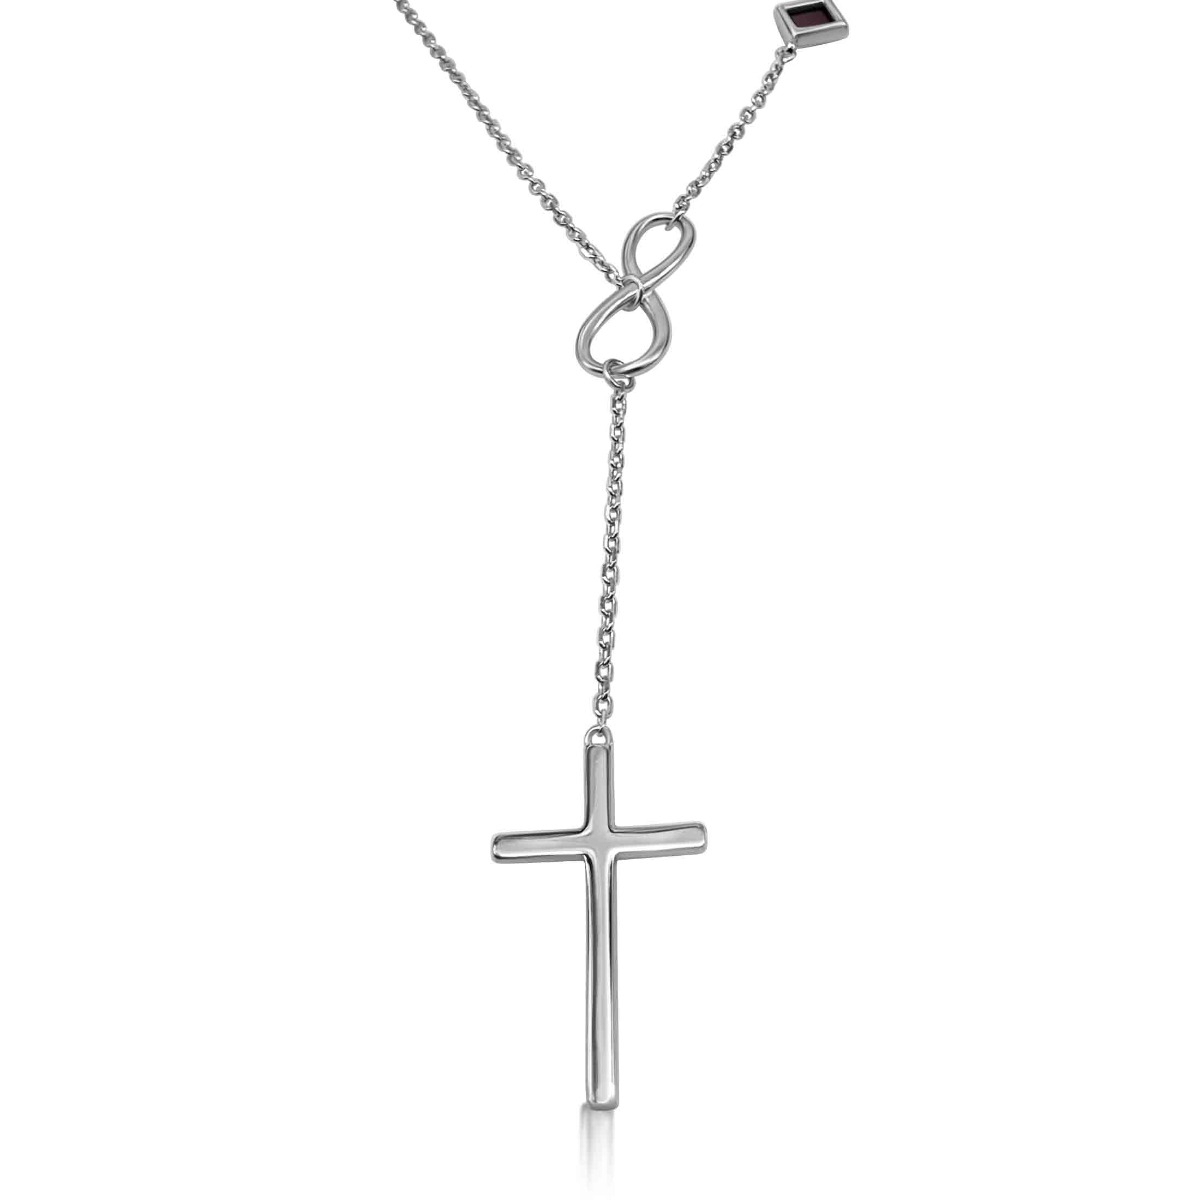 Nano Latin Cross and Infinity Chain Necklace with Bible Microchip - Silver or Gold-Plated - 1